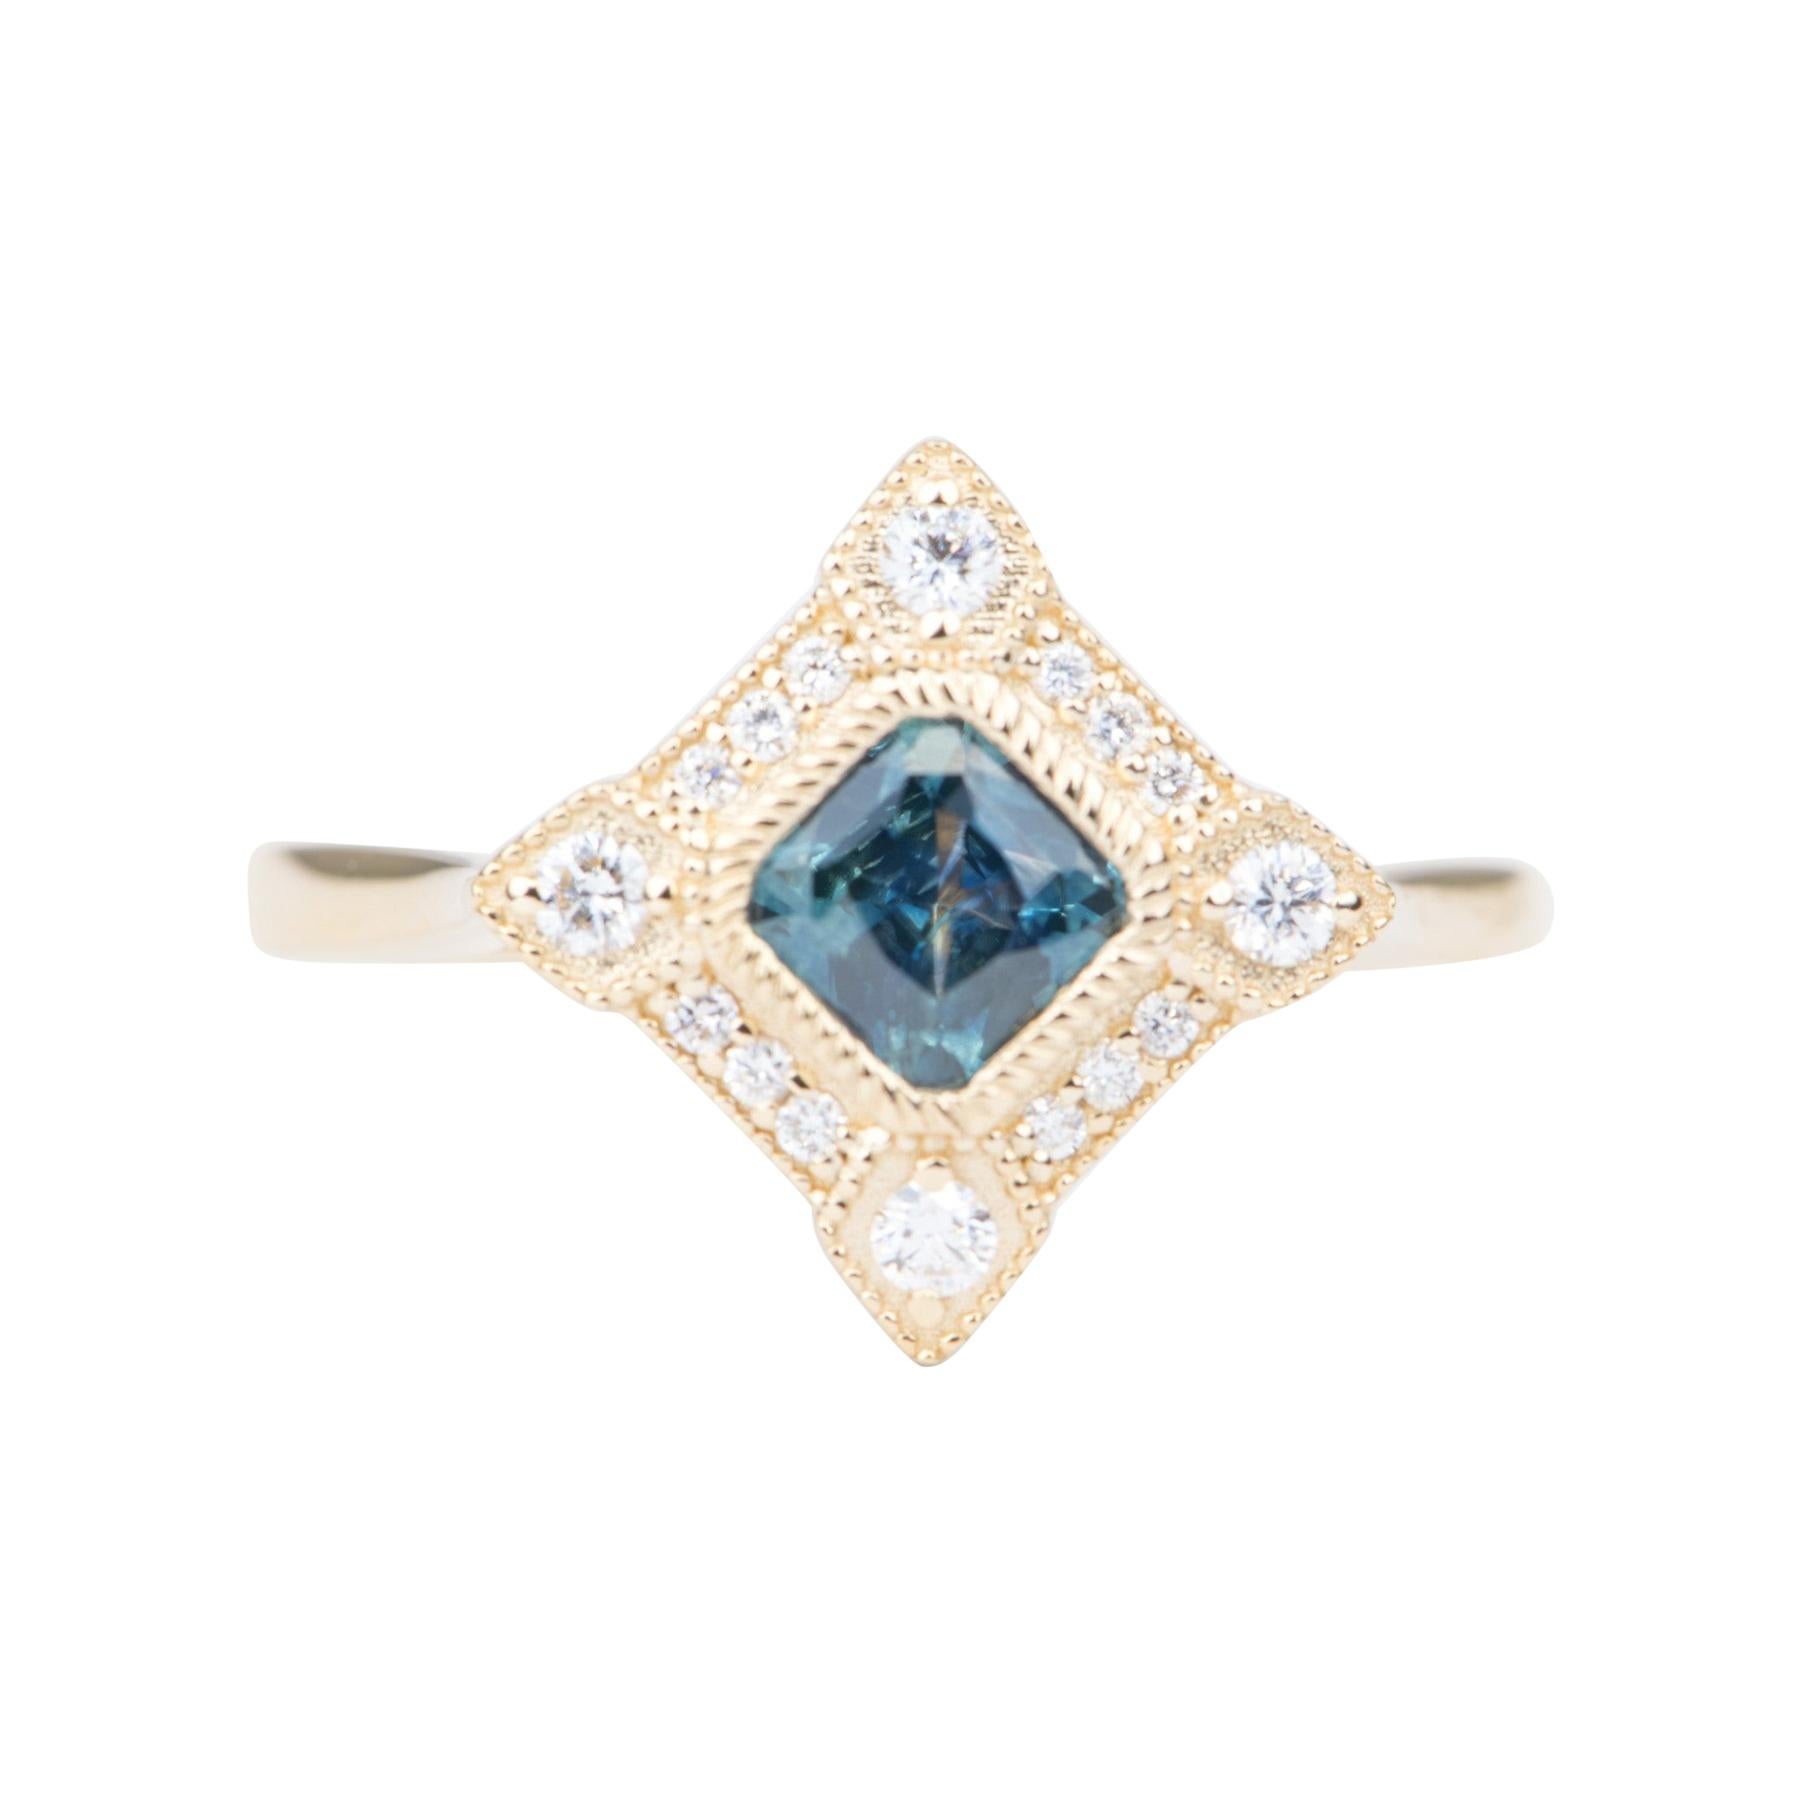 Blue Montana Sapphire with Diamond Halo 14K Yellow Gold Engagement Ring AD2219-4